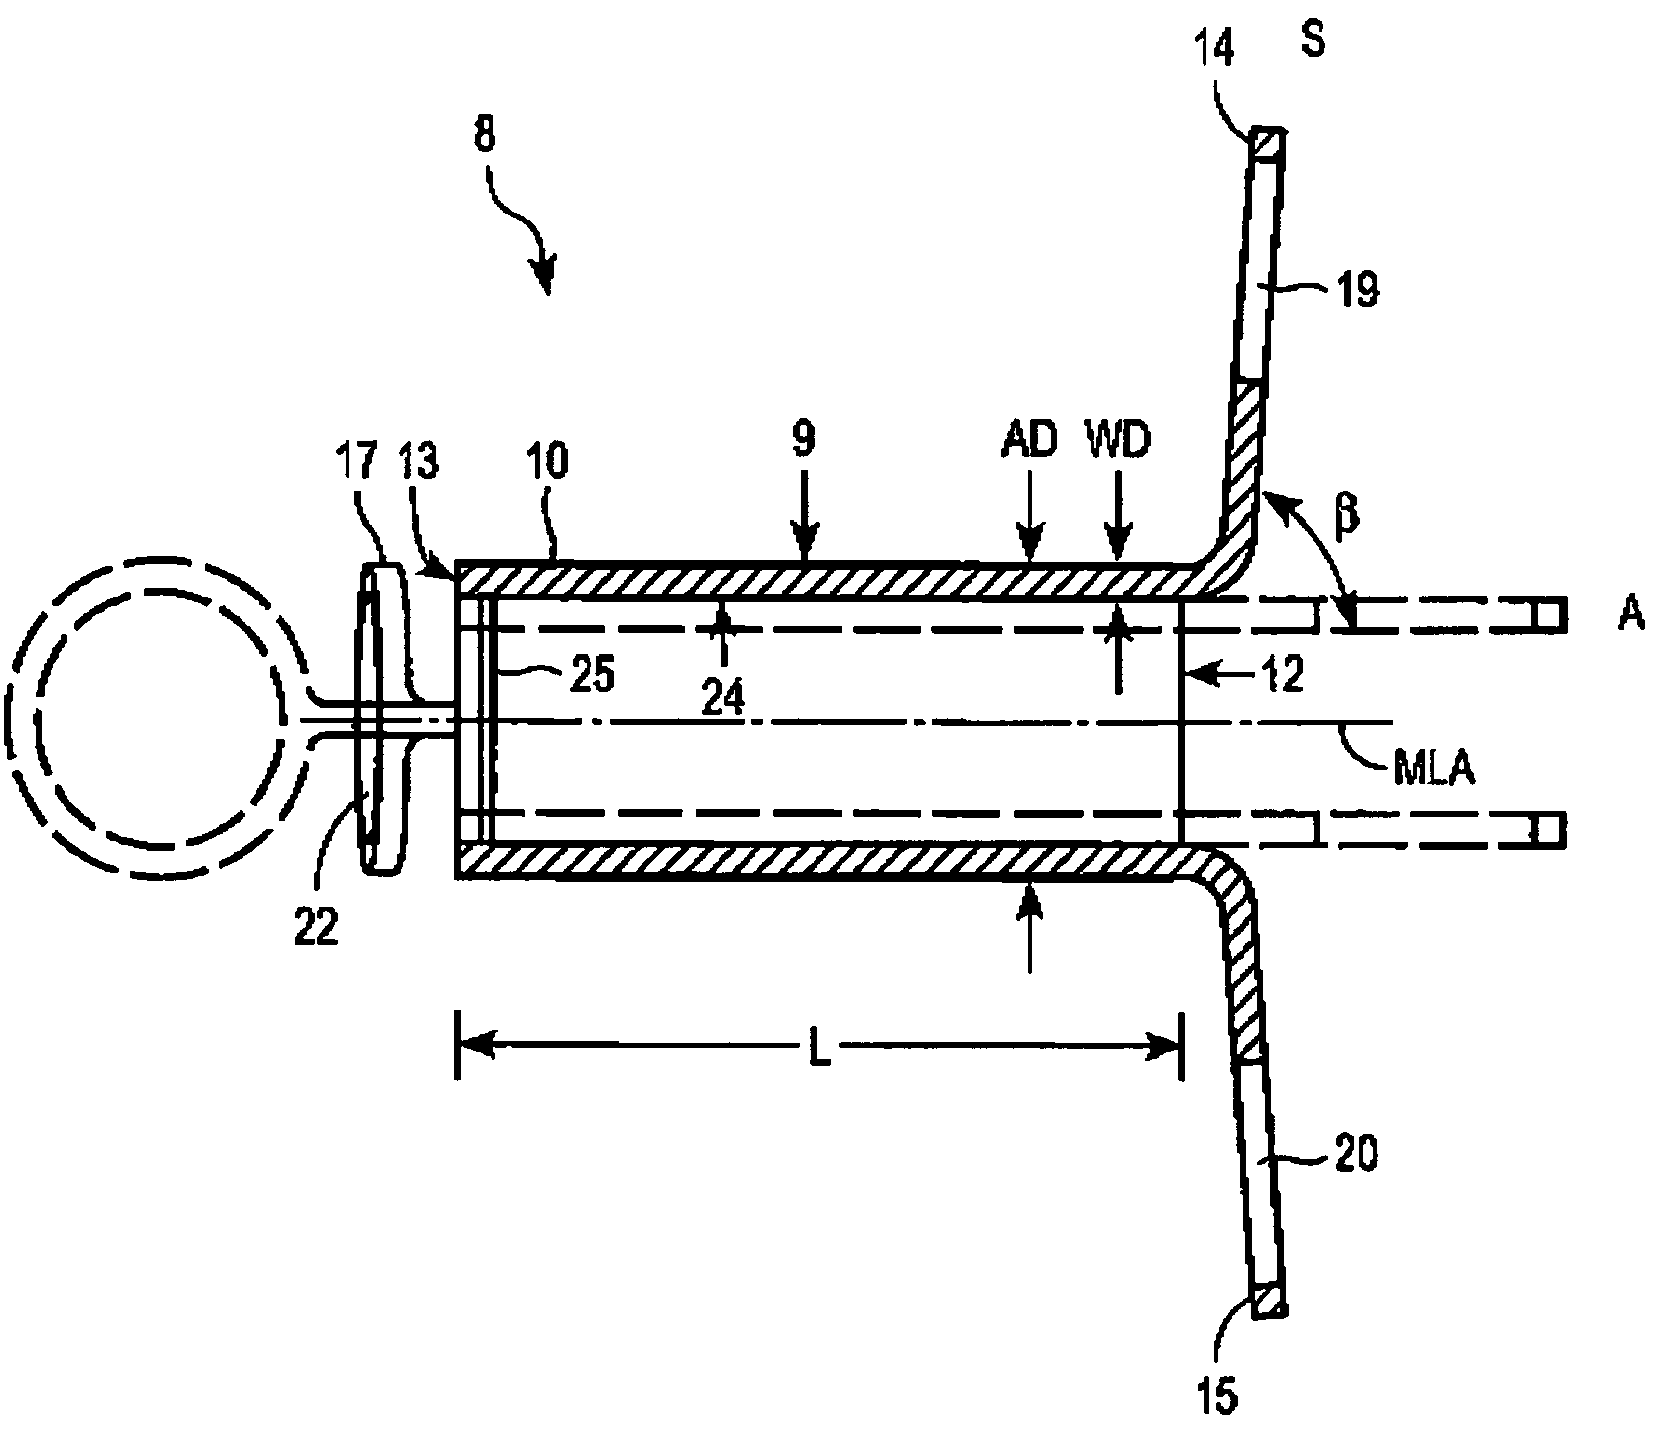 Tracheostoma spacer, tracheotomy method, and device for inserting a tracheostoma spacer